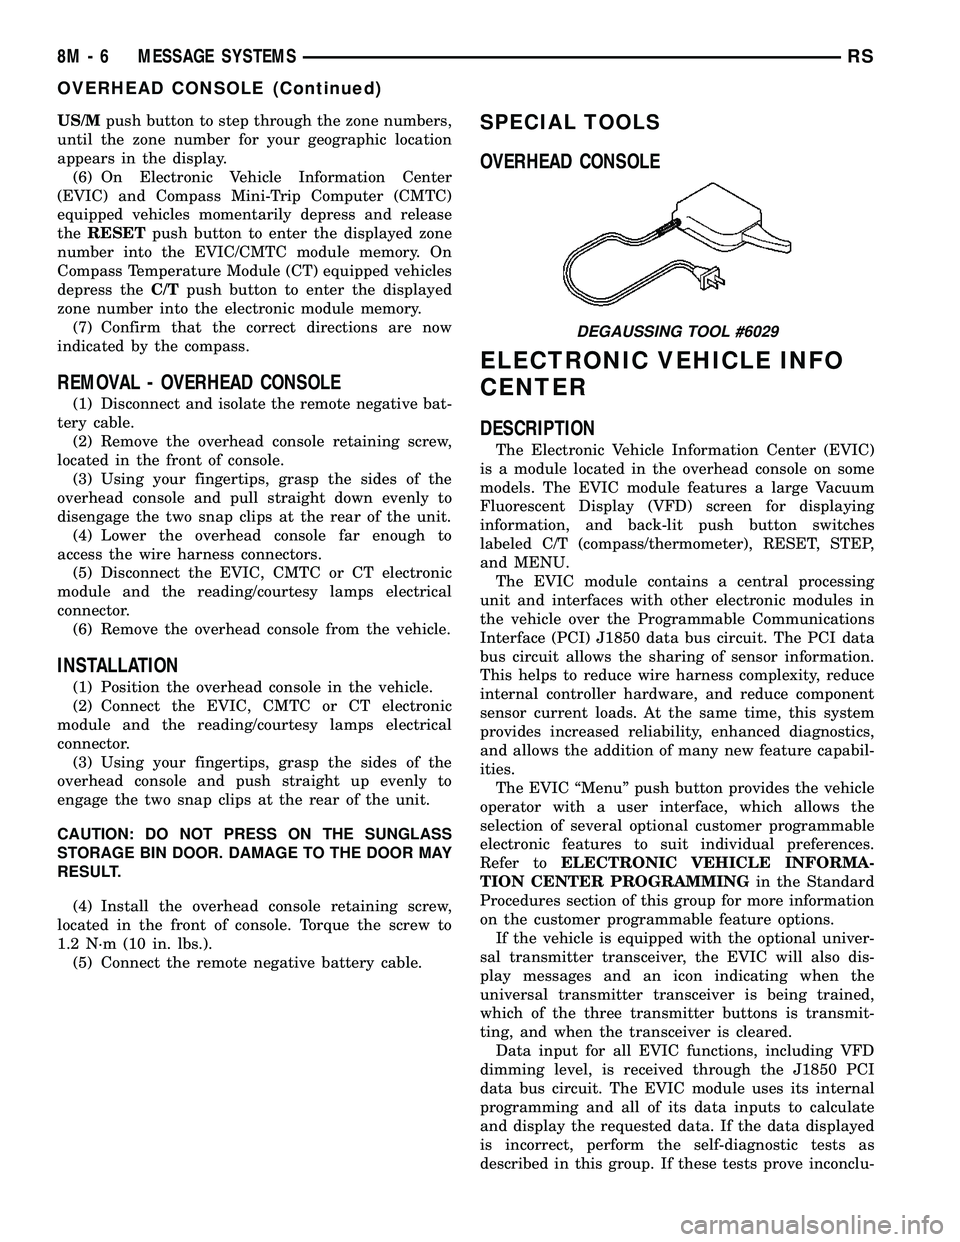 DODGE TOWN AND COUNTRY 2004  Service Manual US/Mpush button to step through the zone numbers,
until the zone number for your geographic location
appears in the display.
(6) On Electronic Vehicle Information Center
(EVIC) and Compass Mini-Trip C